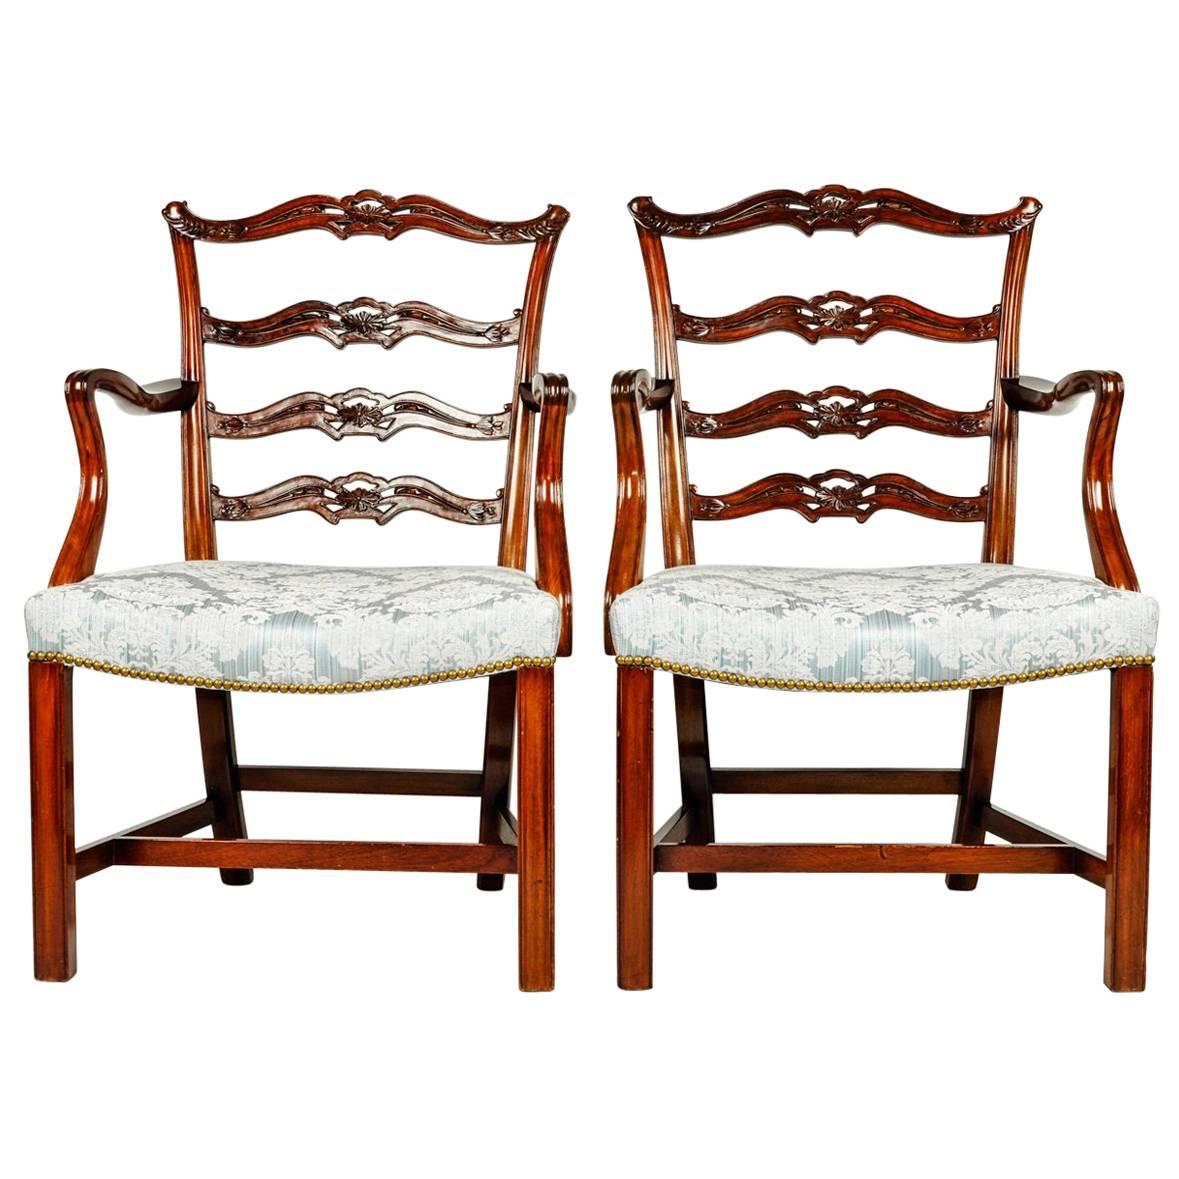 Antique Pair of English Carved Ribbon Back Chairs